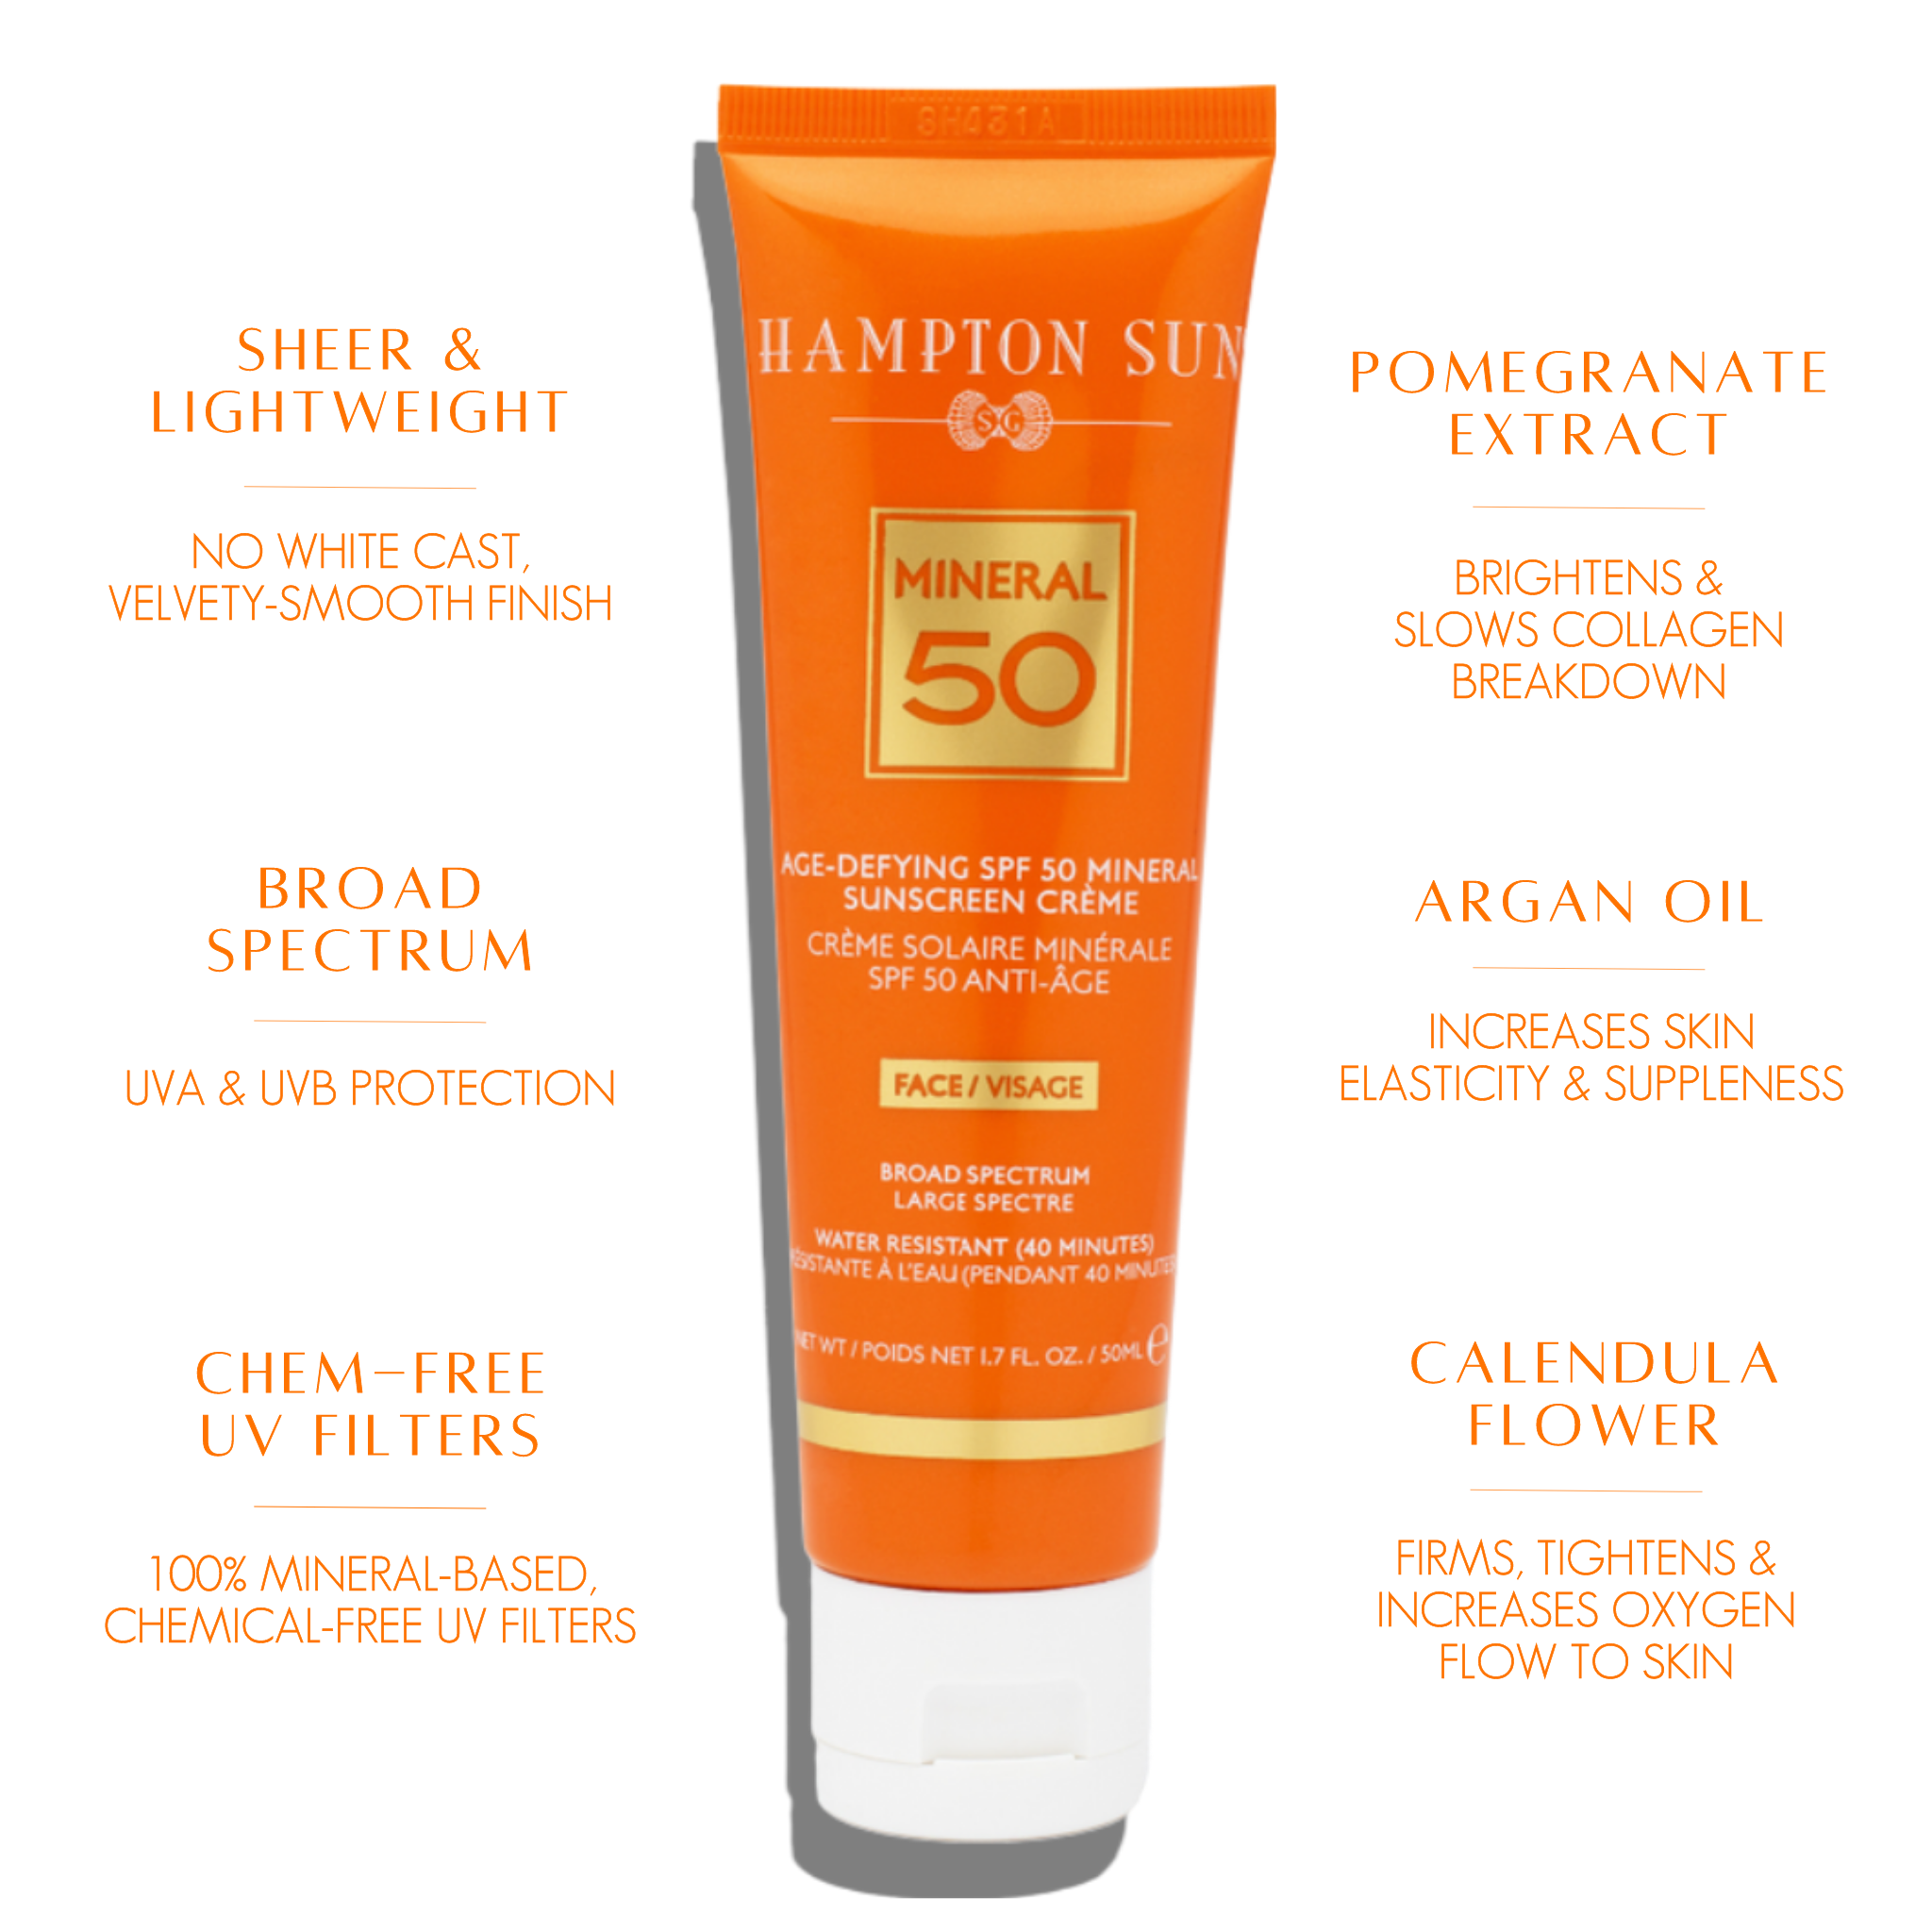 Age-Defying SPF 50 Mineral Sunscreen Crème for Face